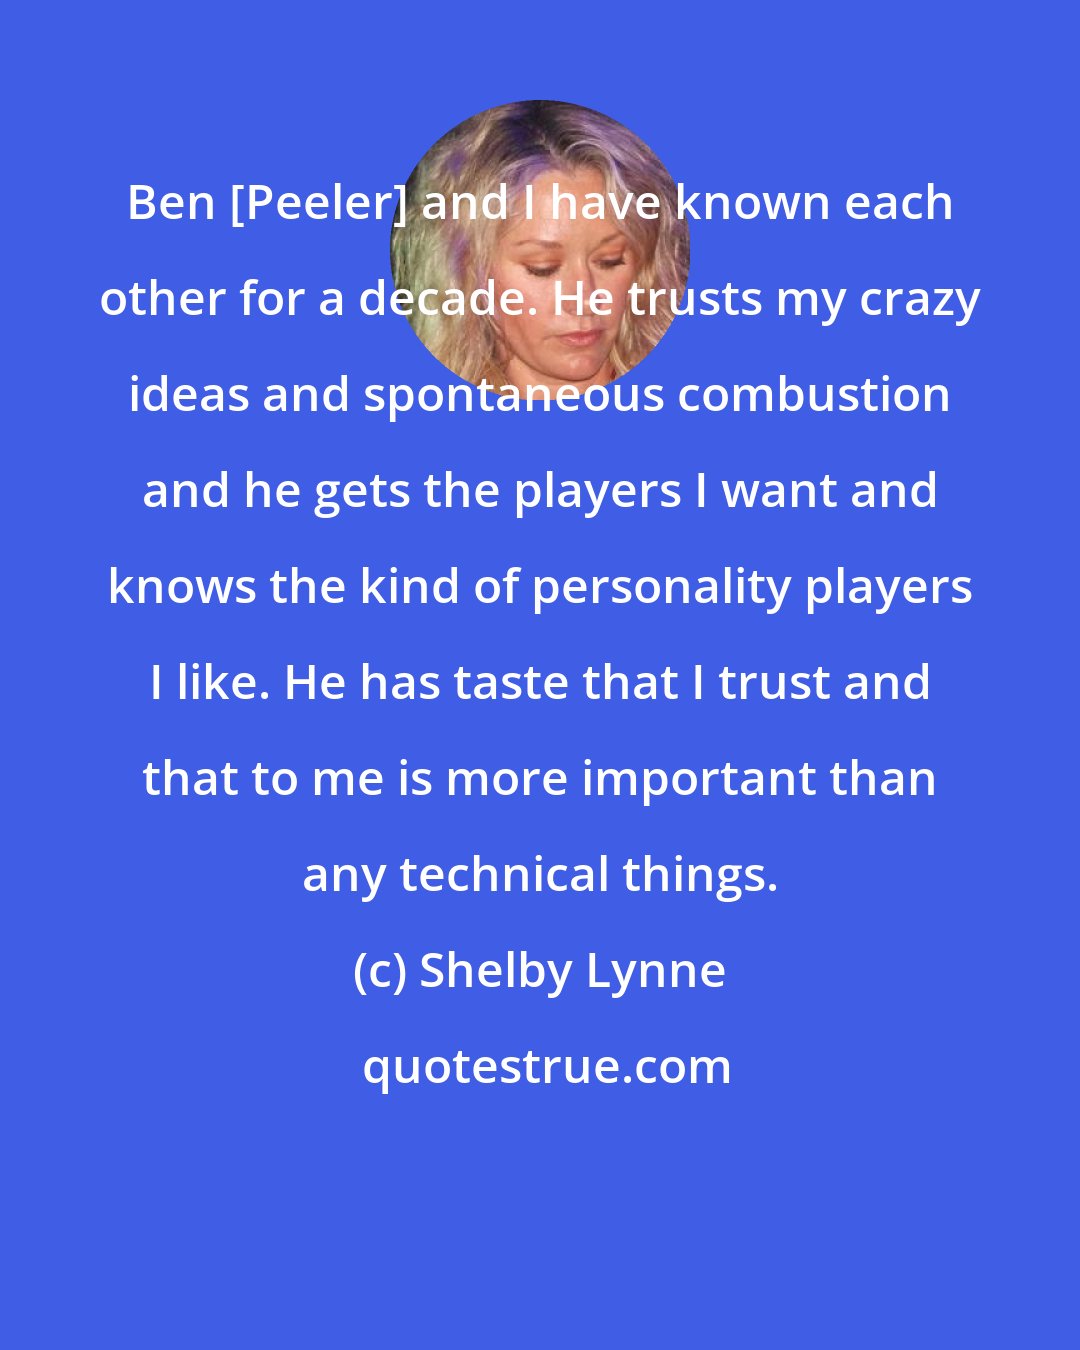 Shelby Lynne: Ben [Peeler] and I have known each other for a decade. He trusts my crazy ideas and spontaneous combustion and he gets the players I want and knows the kind of personality players I like. He has taste that I trust and that to me is more important than any technical things.